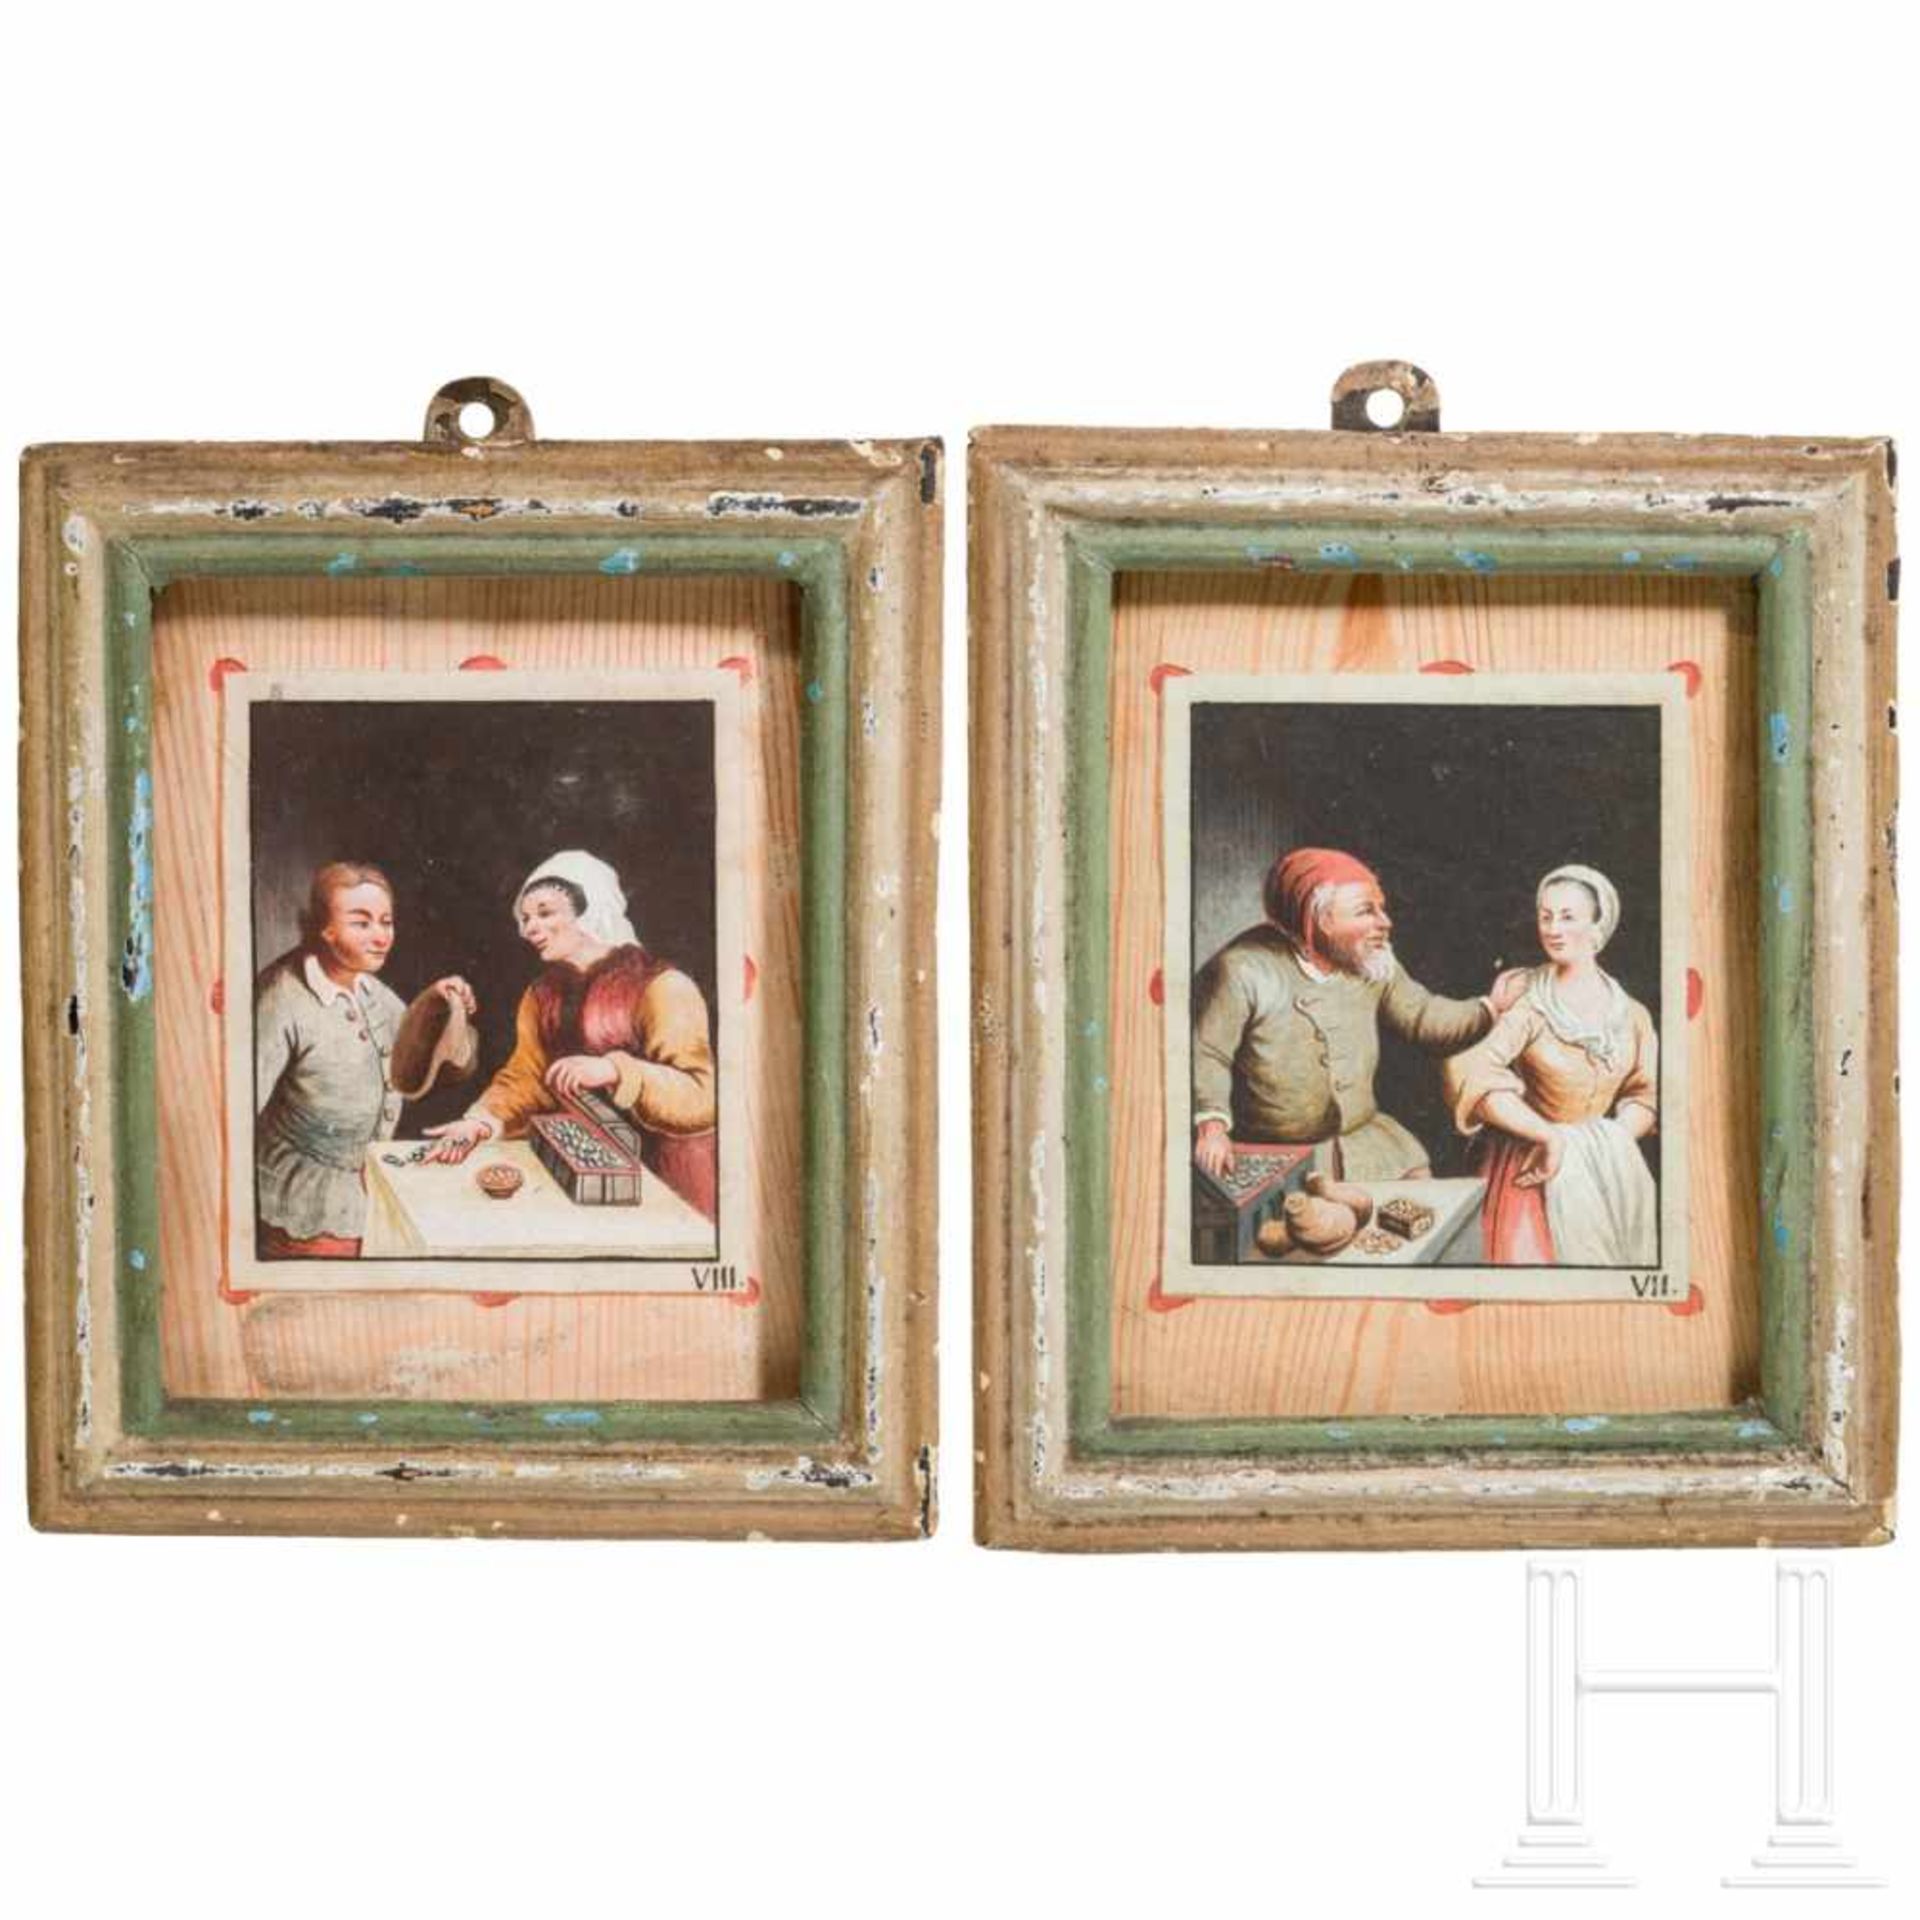 A pair of Dutch tromp-l'oeil paintings, 18th/19th century Framed behind glass. Oil on paper.